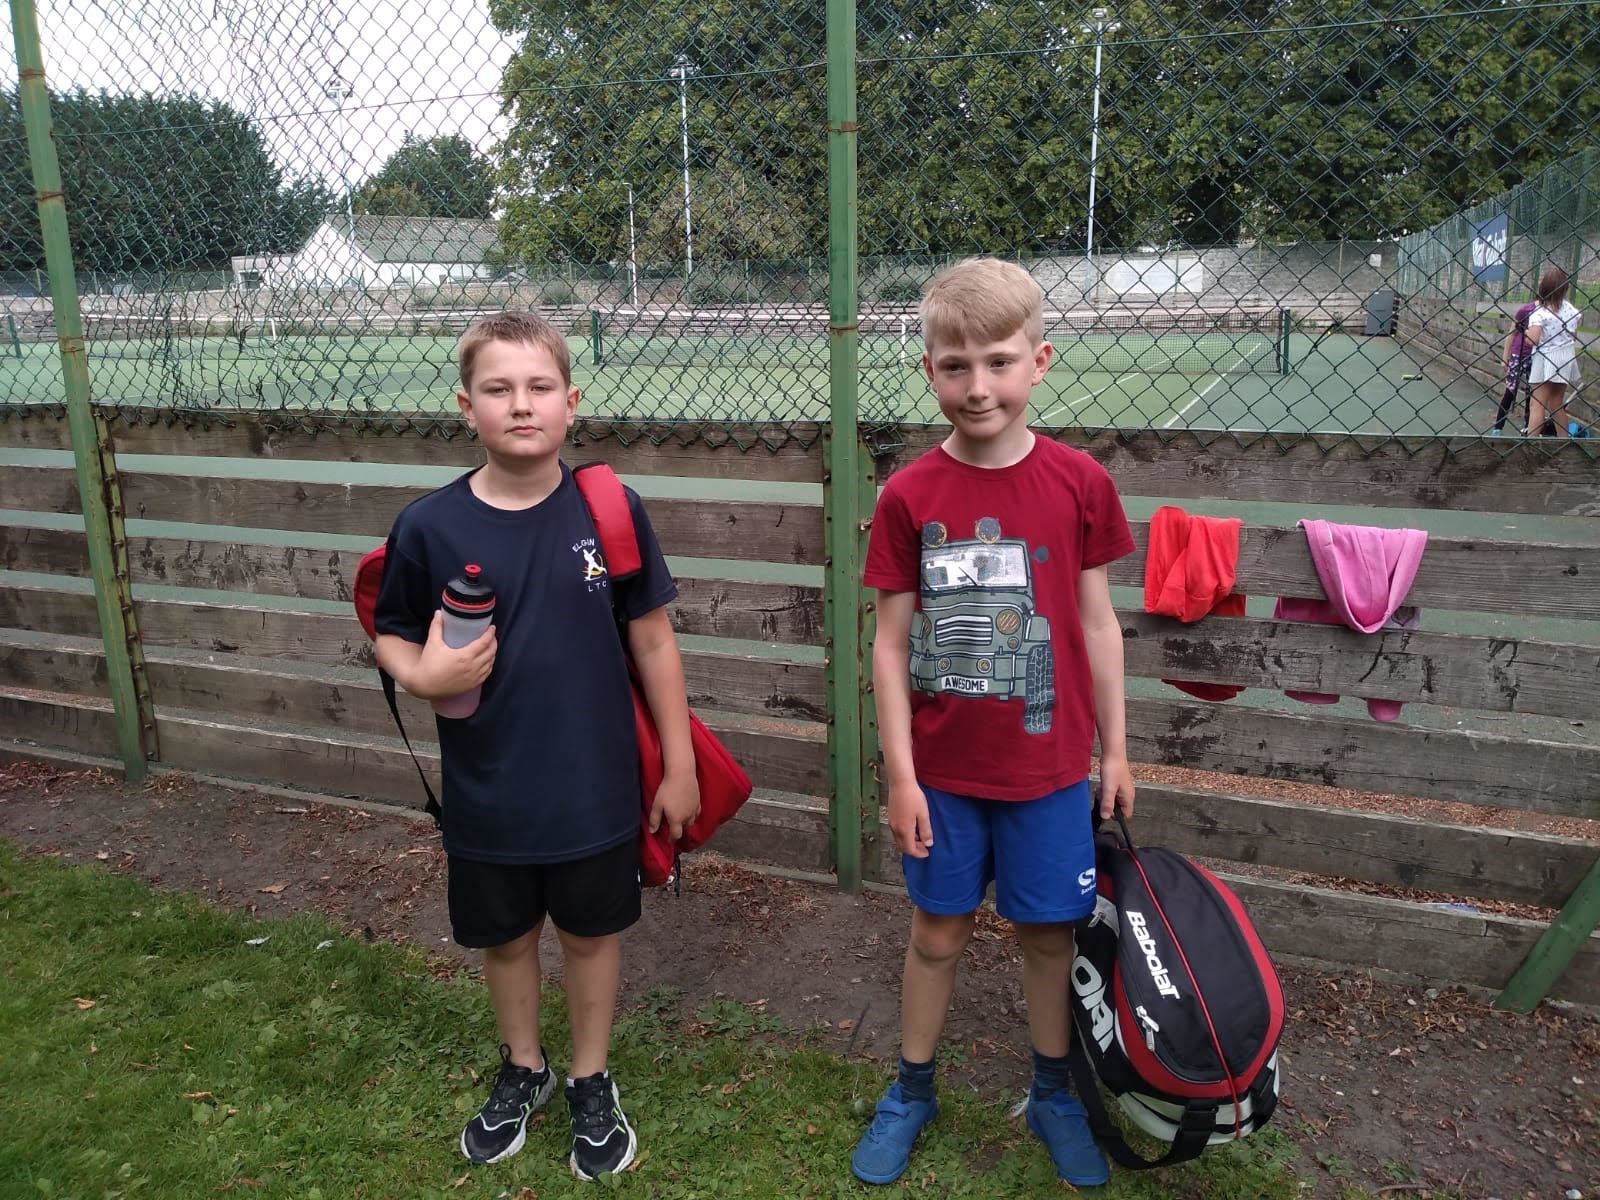 Under-9s winner Donald Coull (right) with Borys Sulkowski.